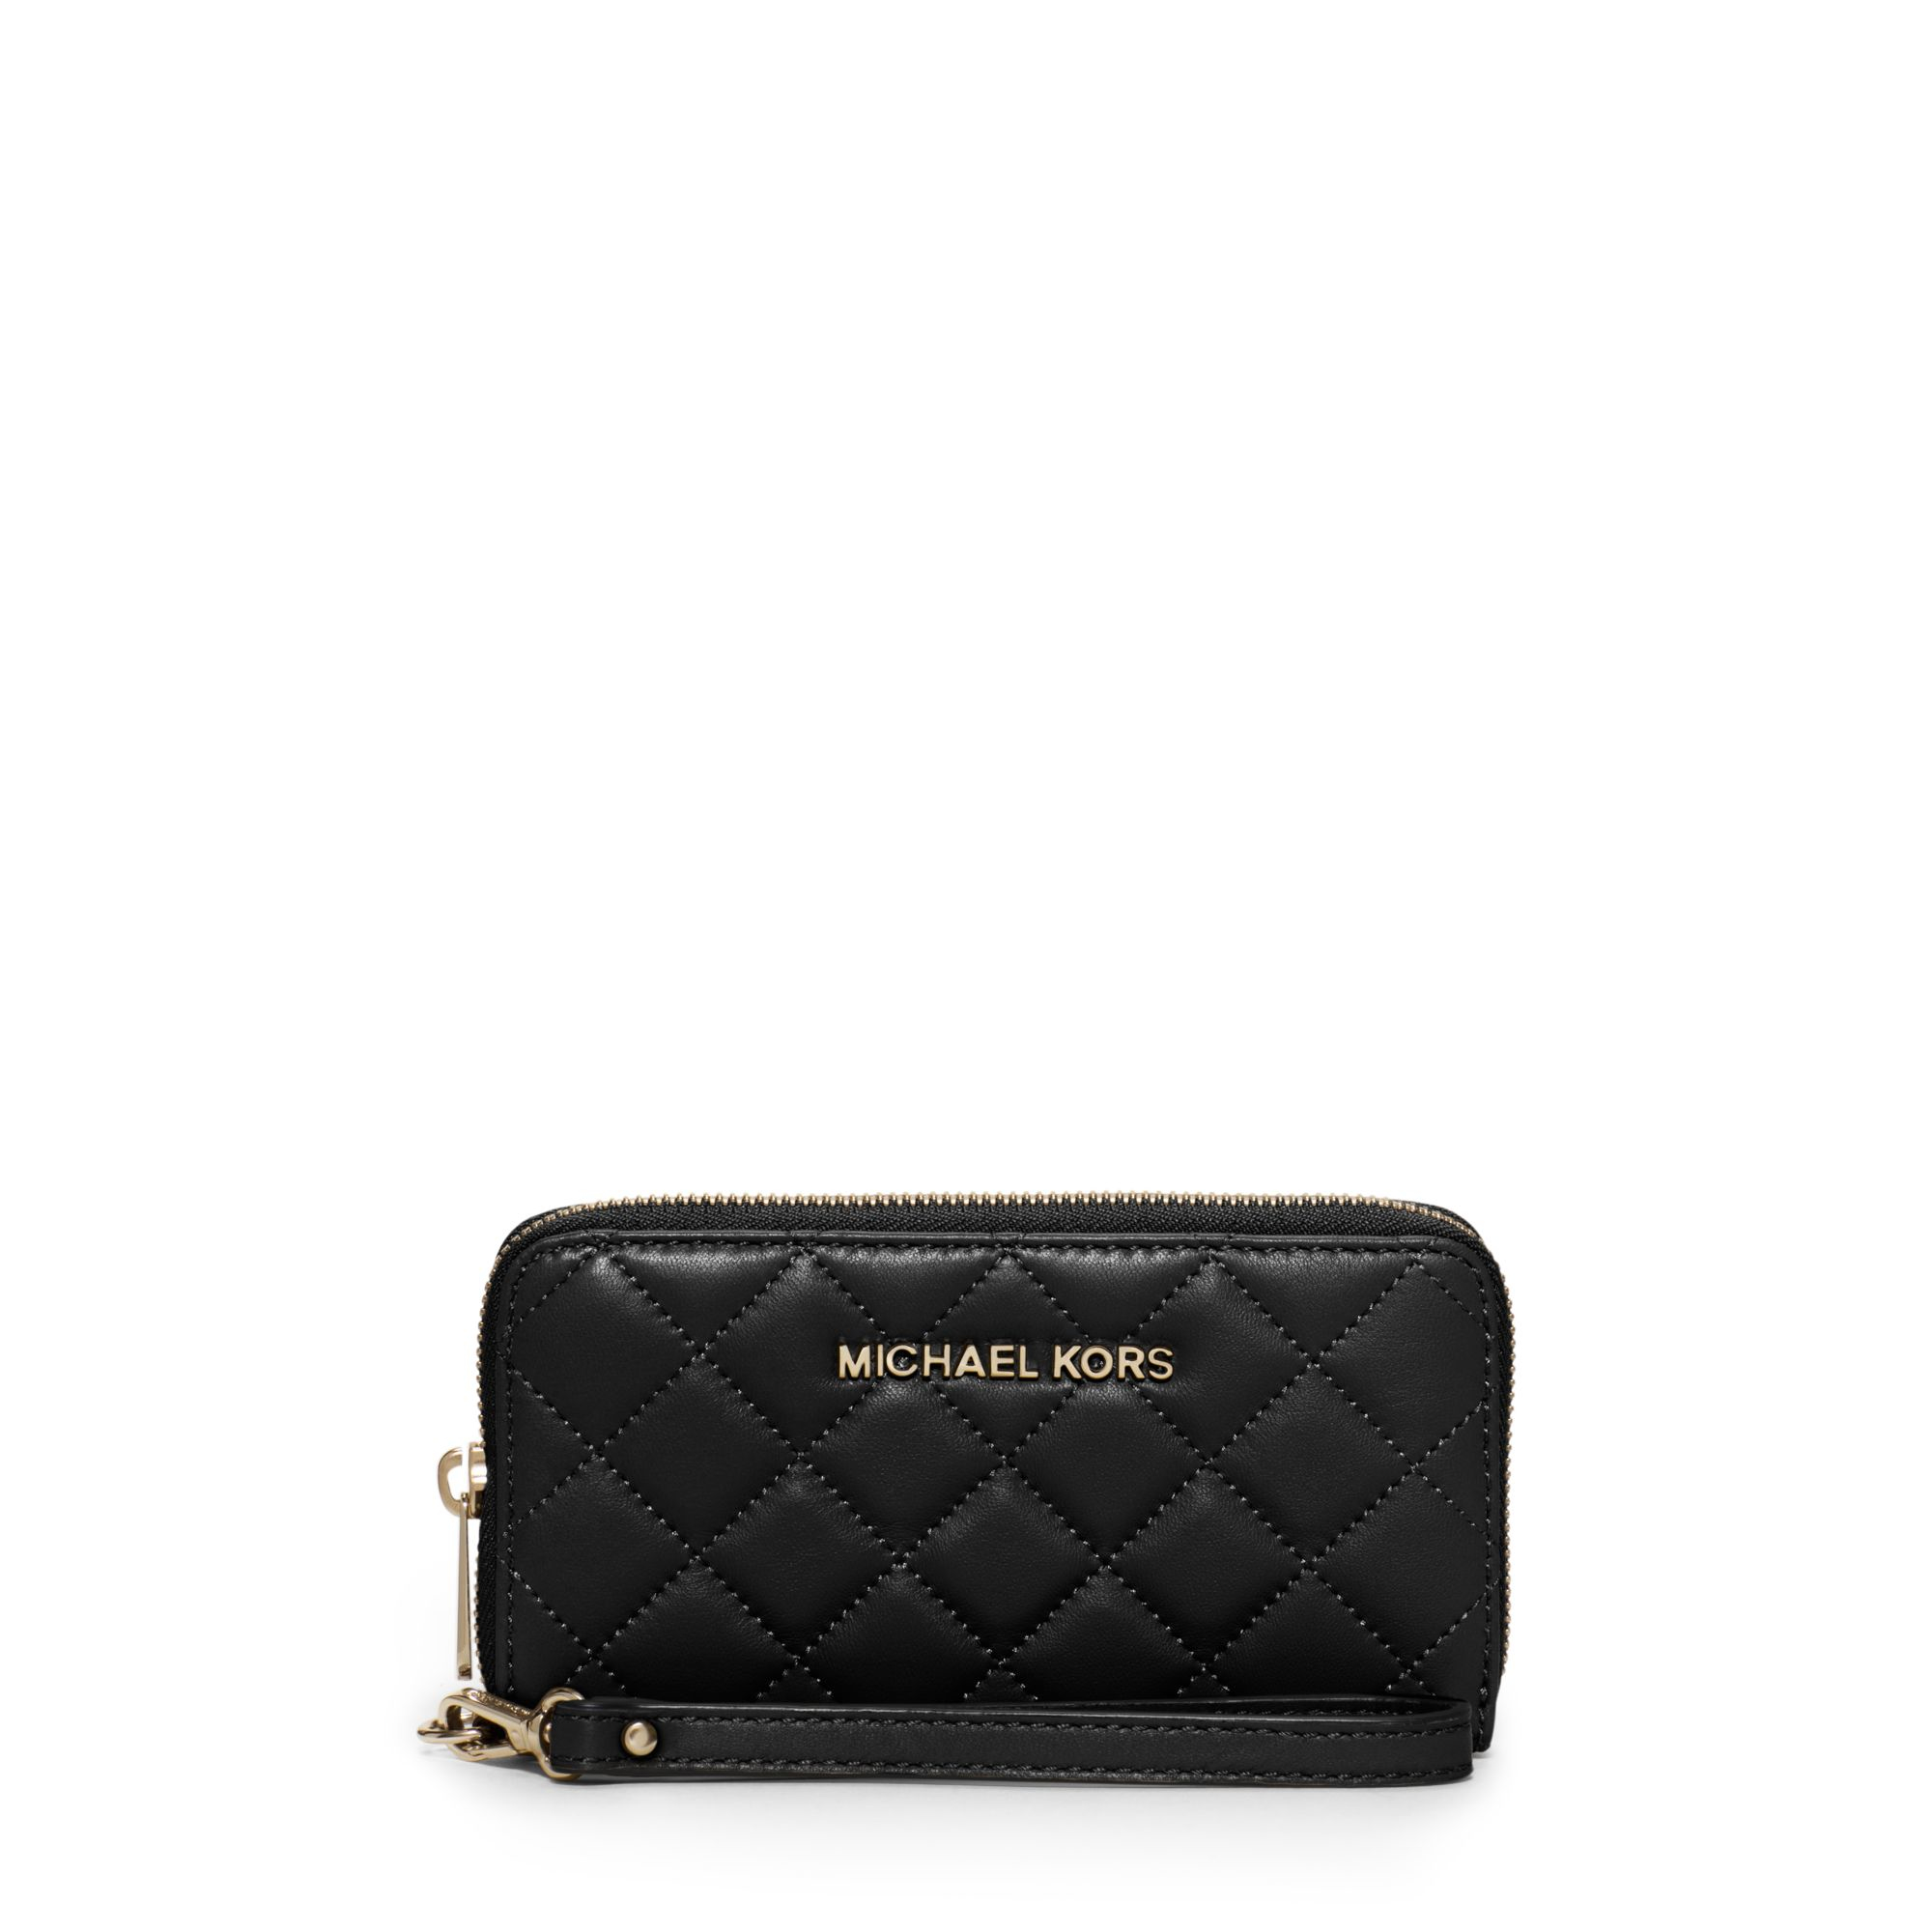 Lyst - Michael Kors Susannah Large Quilted-leather Smartphone Wristlet ...